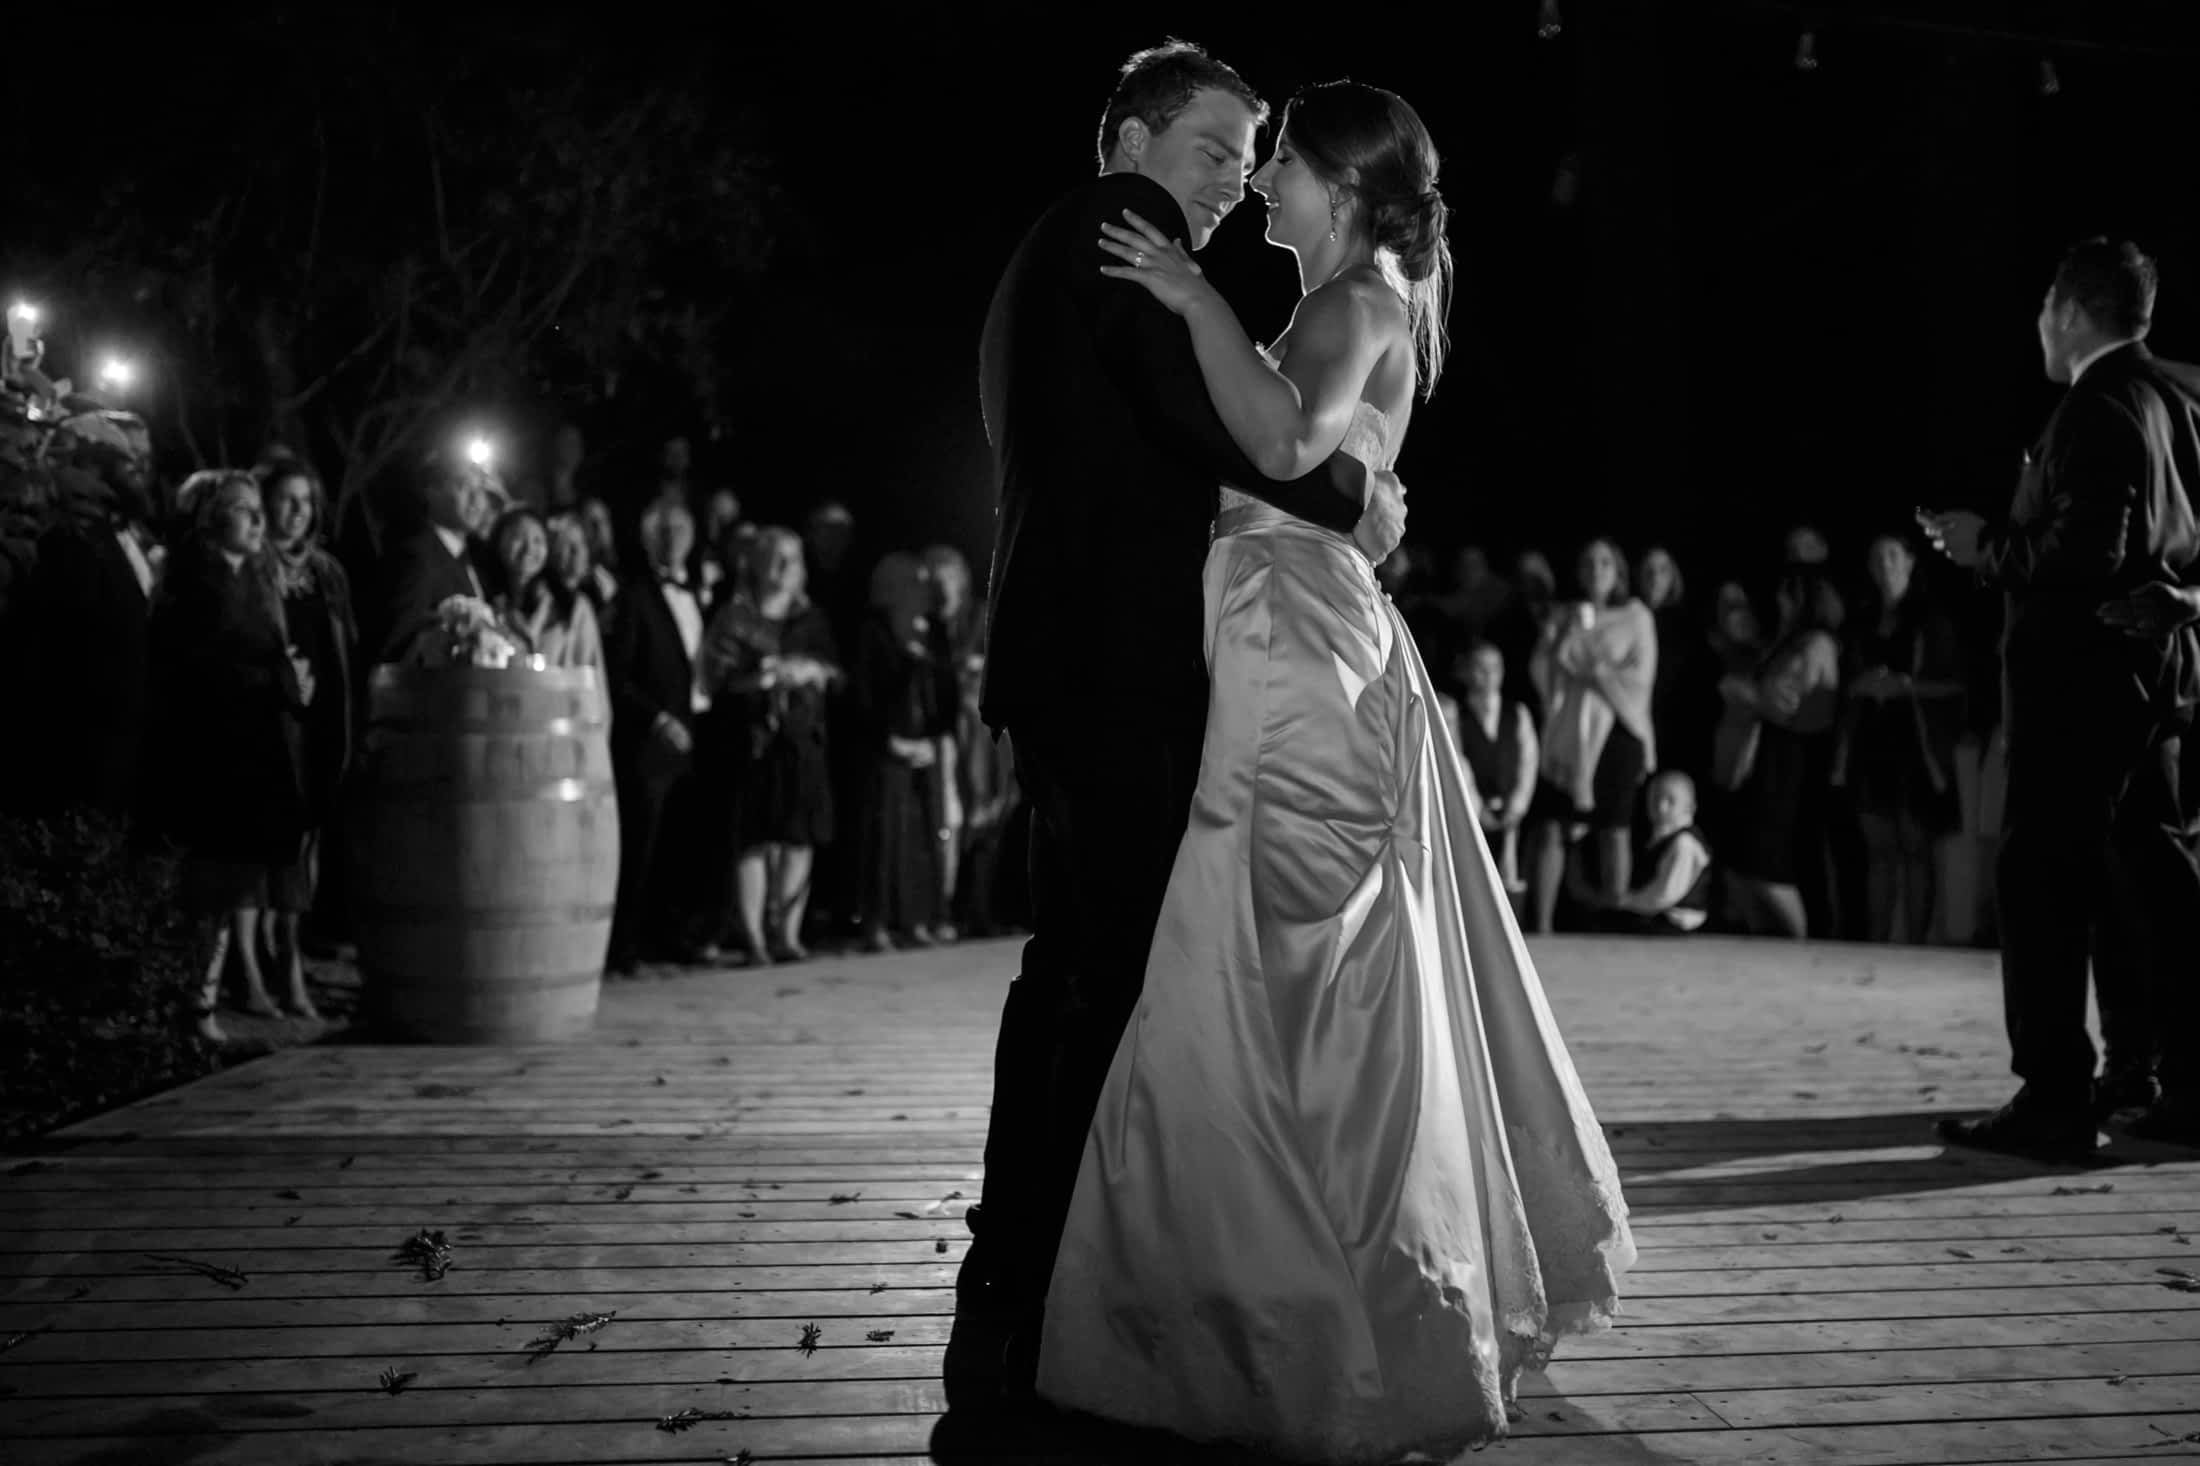 Black and white moody image of the bride and groom dancing with the dimly lit guests in the background.